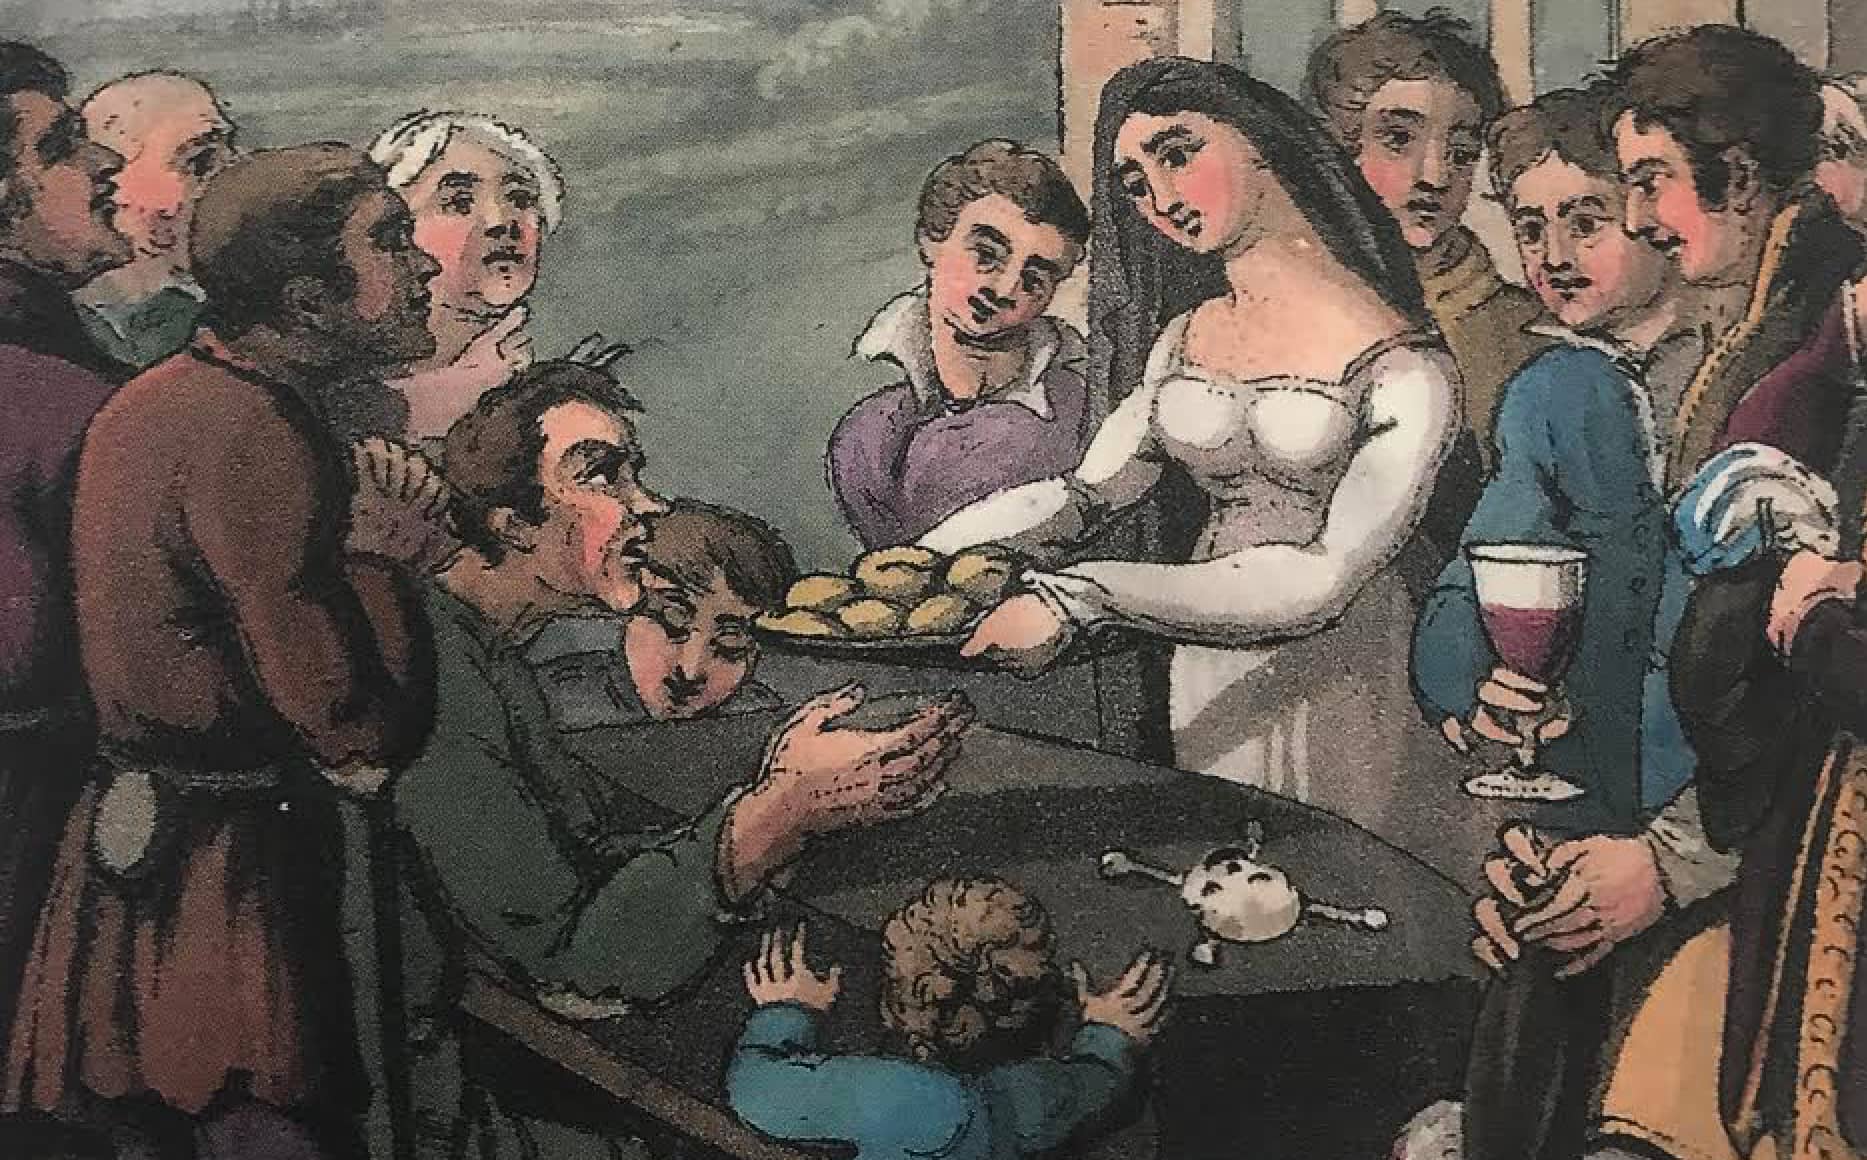 A Welsh funeral of 1814, showing the custom of passing food across the body of the deceased. Hand-coloured engraving by I. Havell for The Cambrian Popular Antiquities